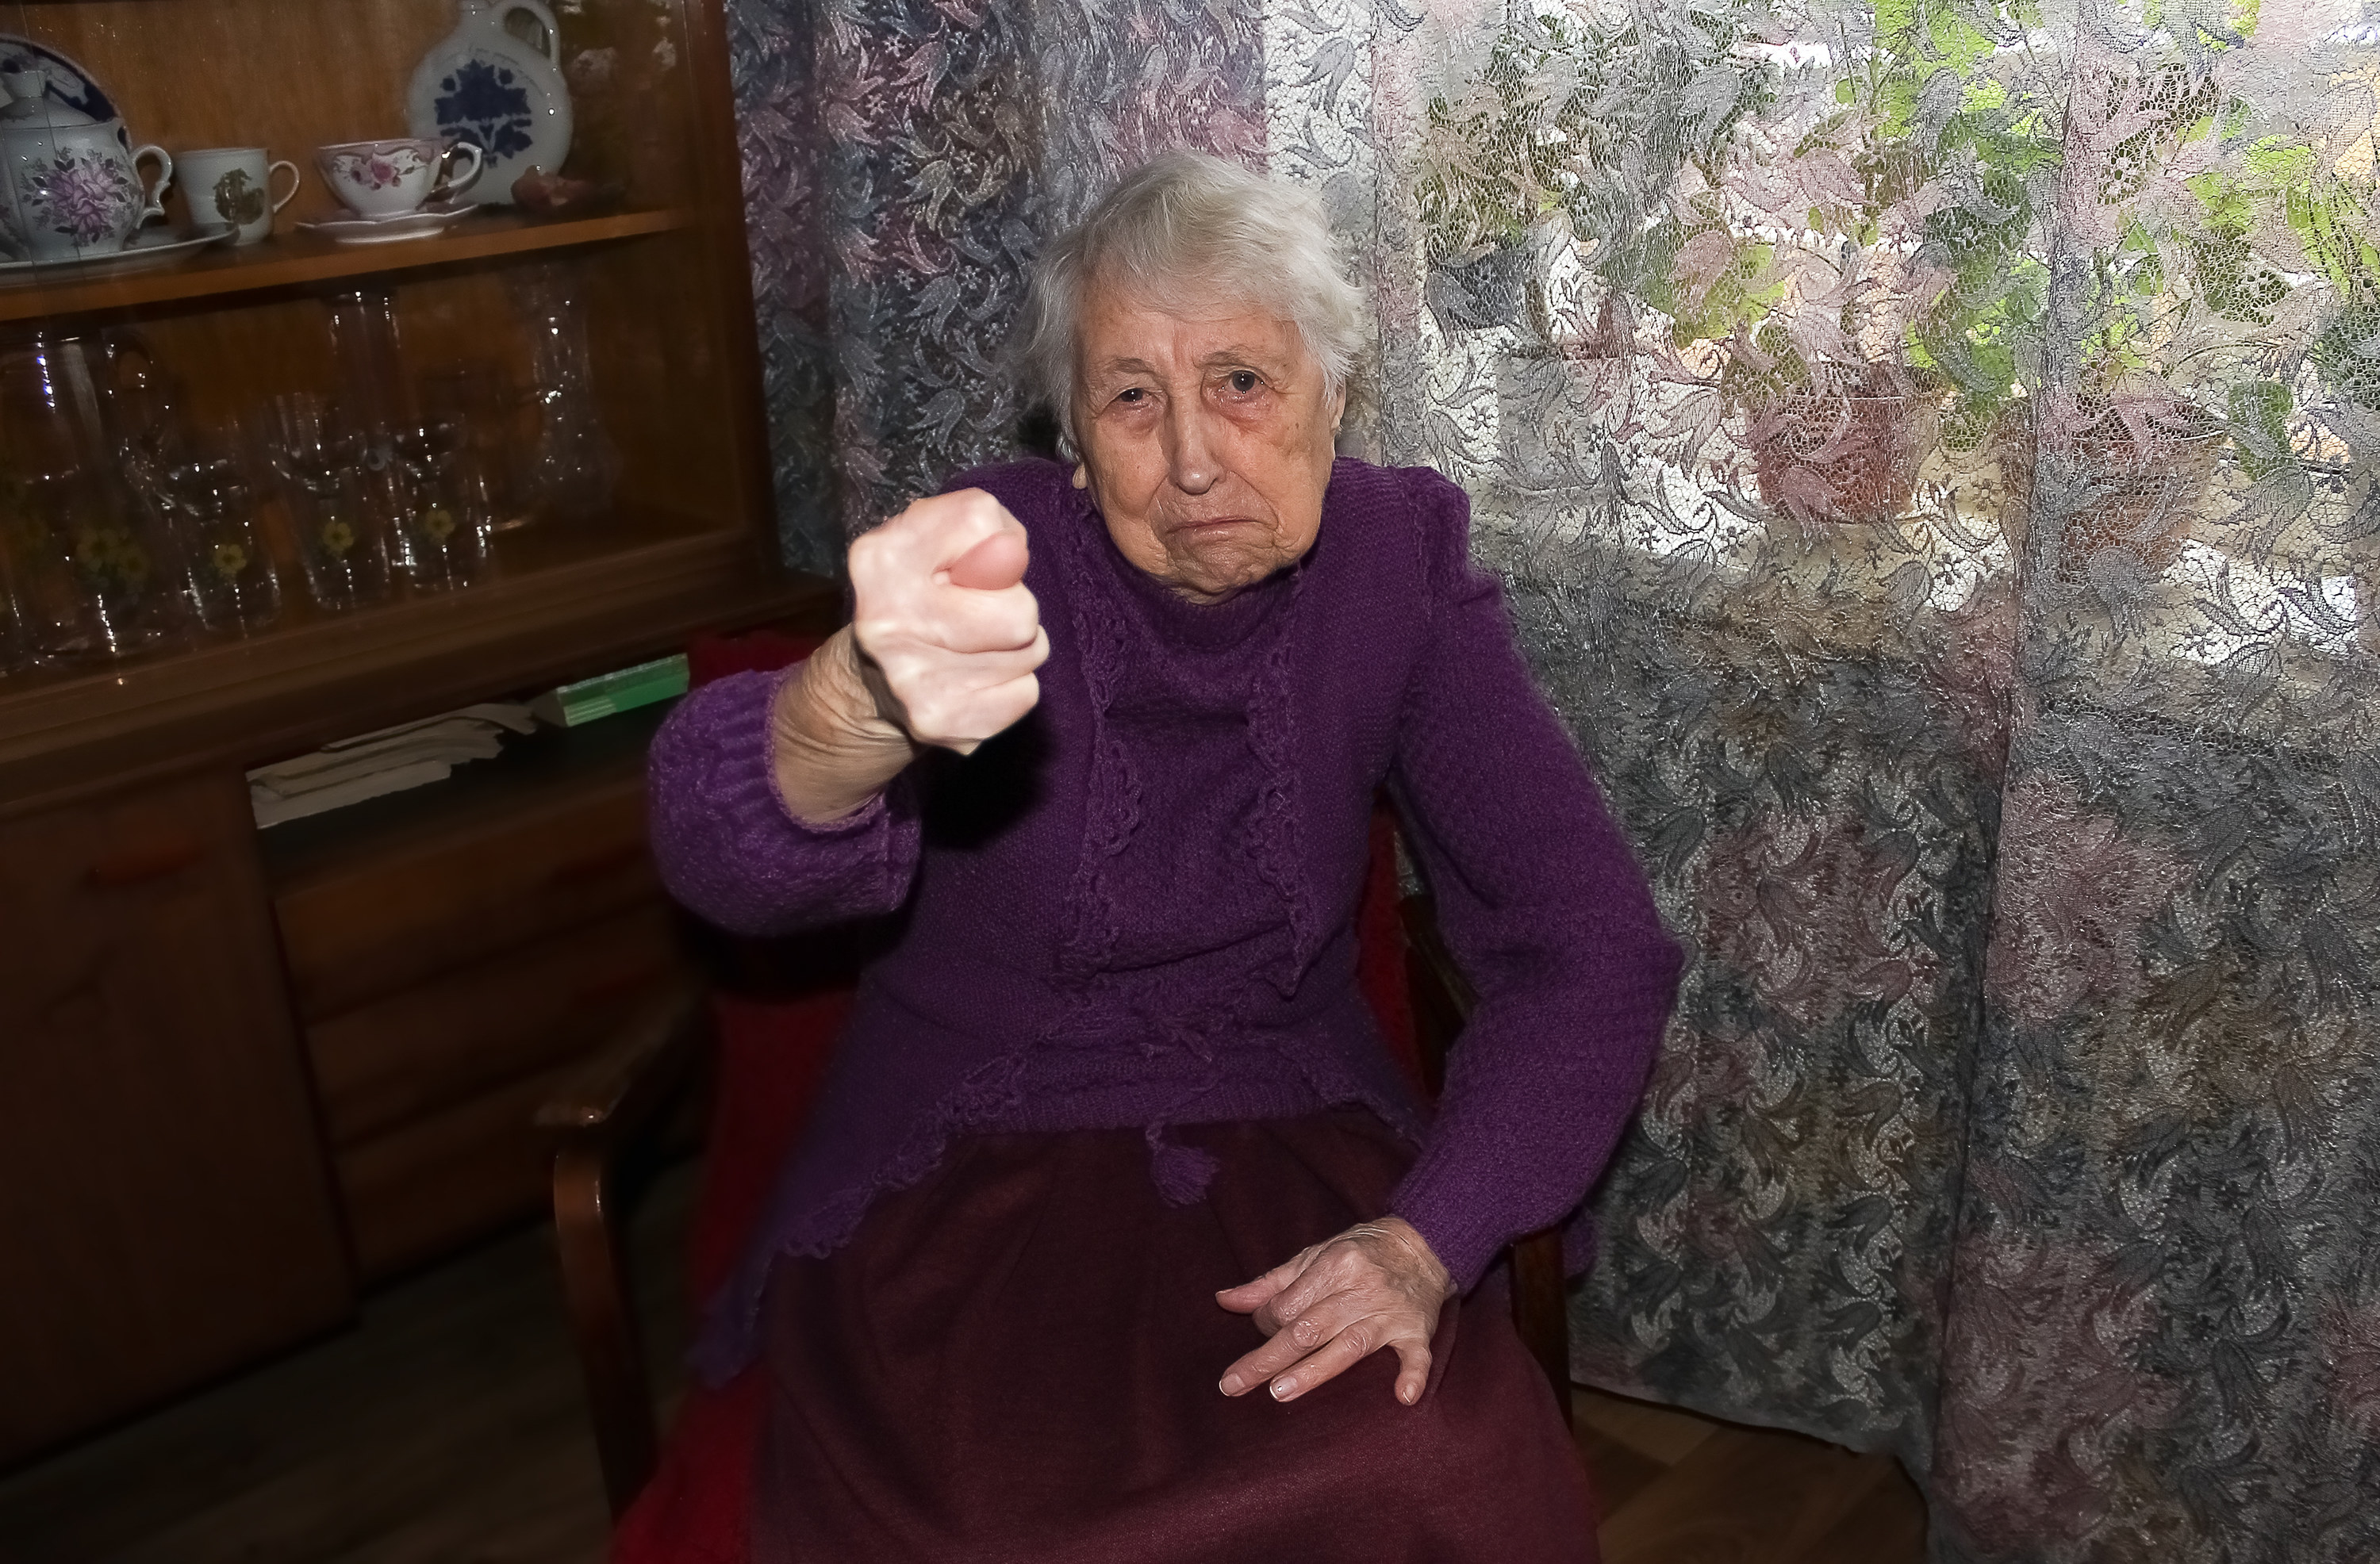 A woman holding a fist in anger